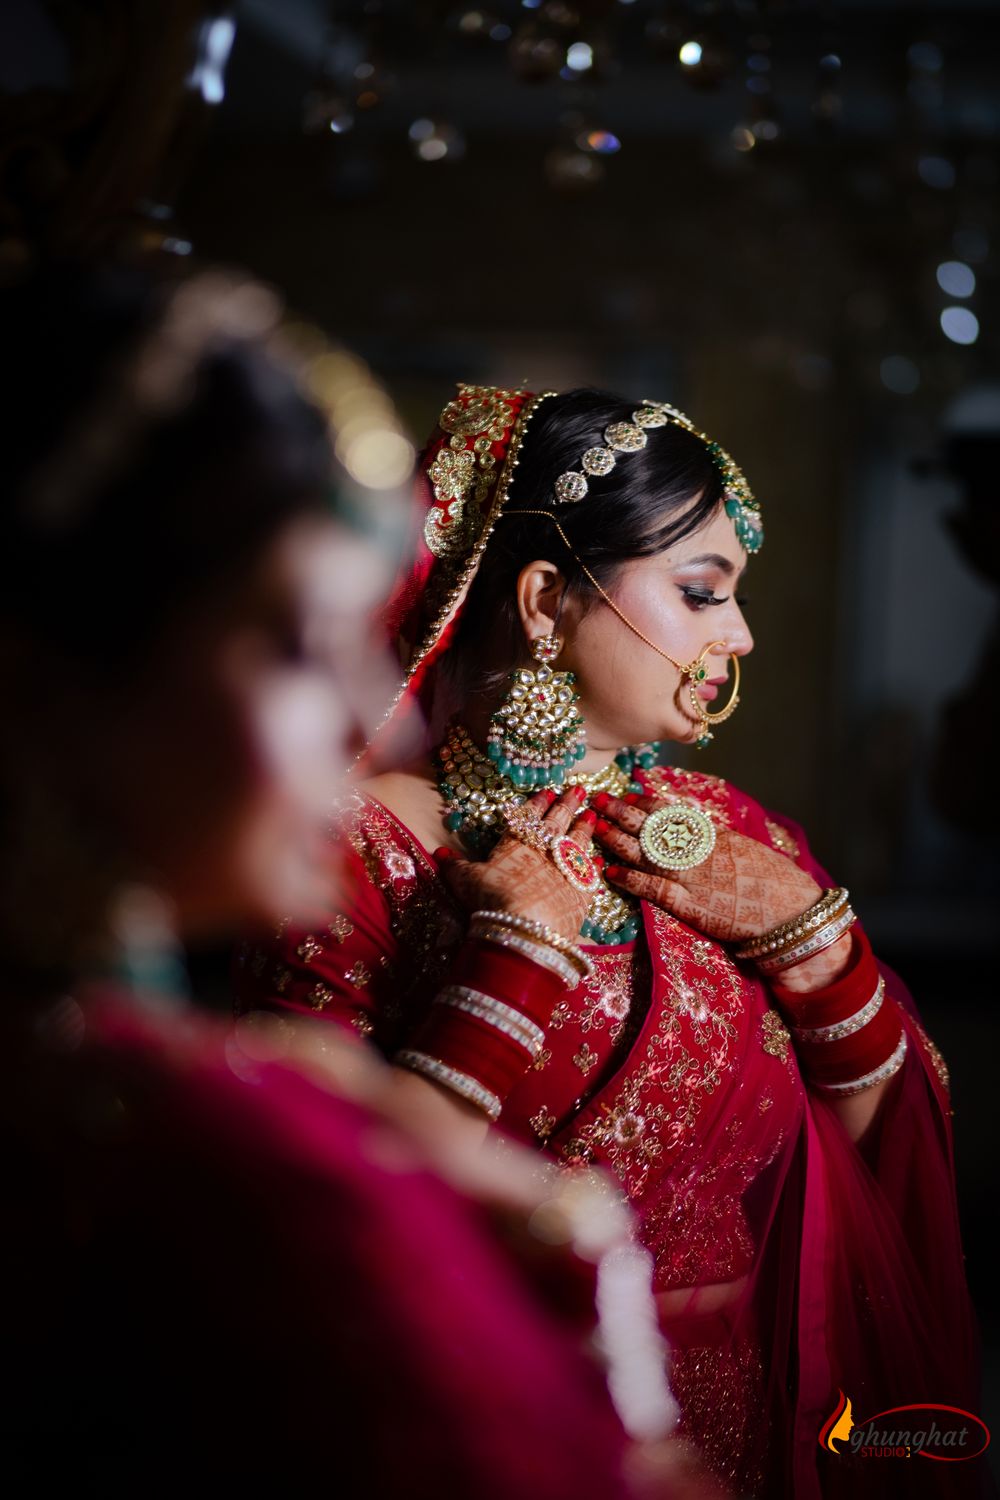 Photo From Wedding photography  - By Ghunghat Studio